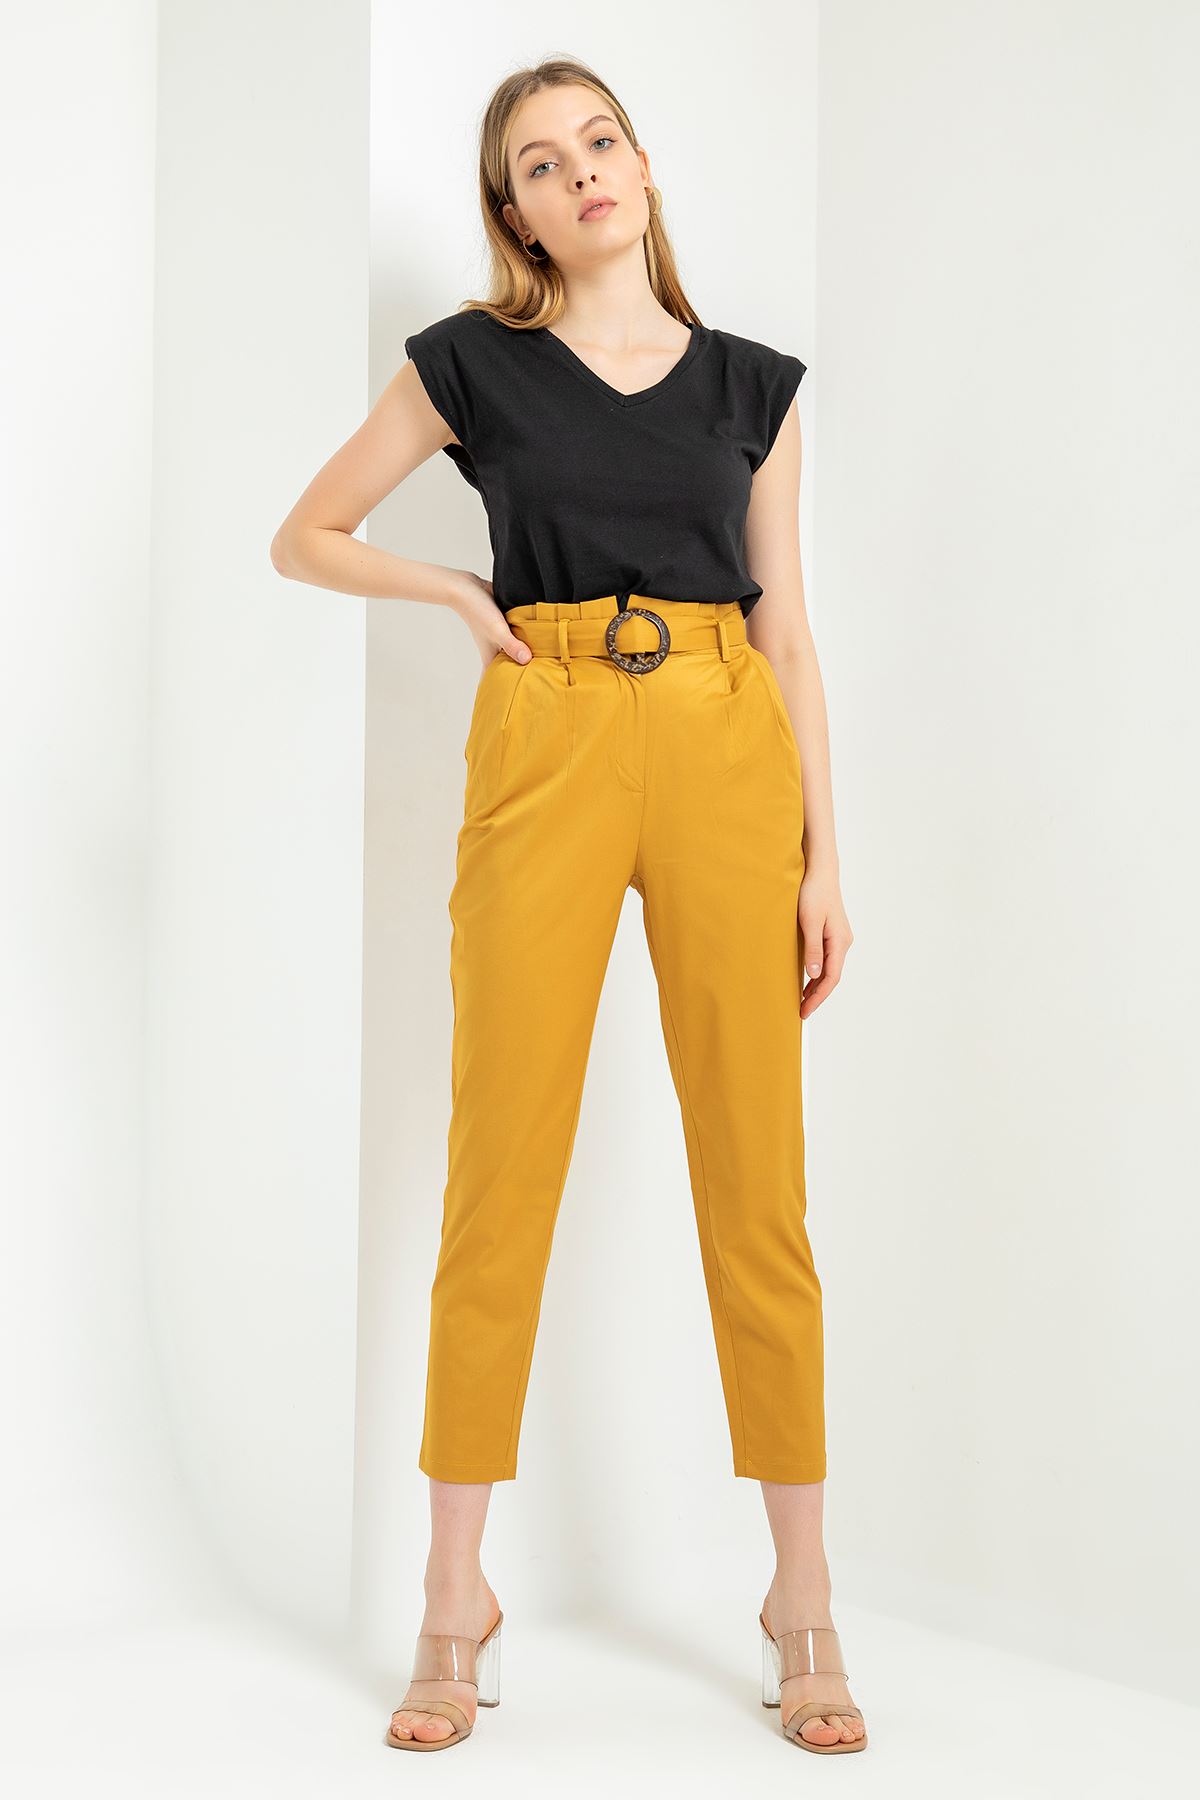 Woven Fabric Ankle Length Carrot Style Belted Women'S Trouser - Mustard